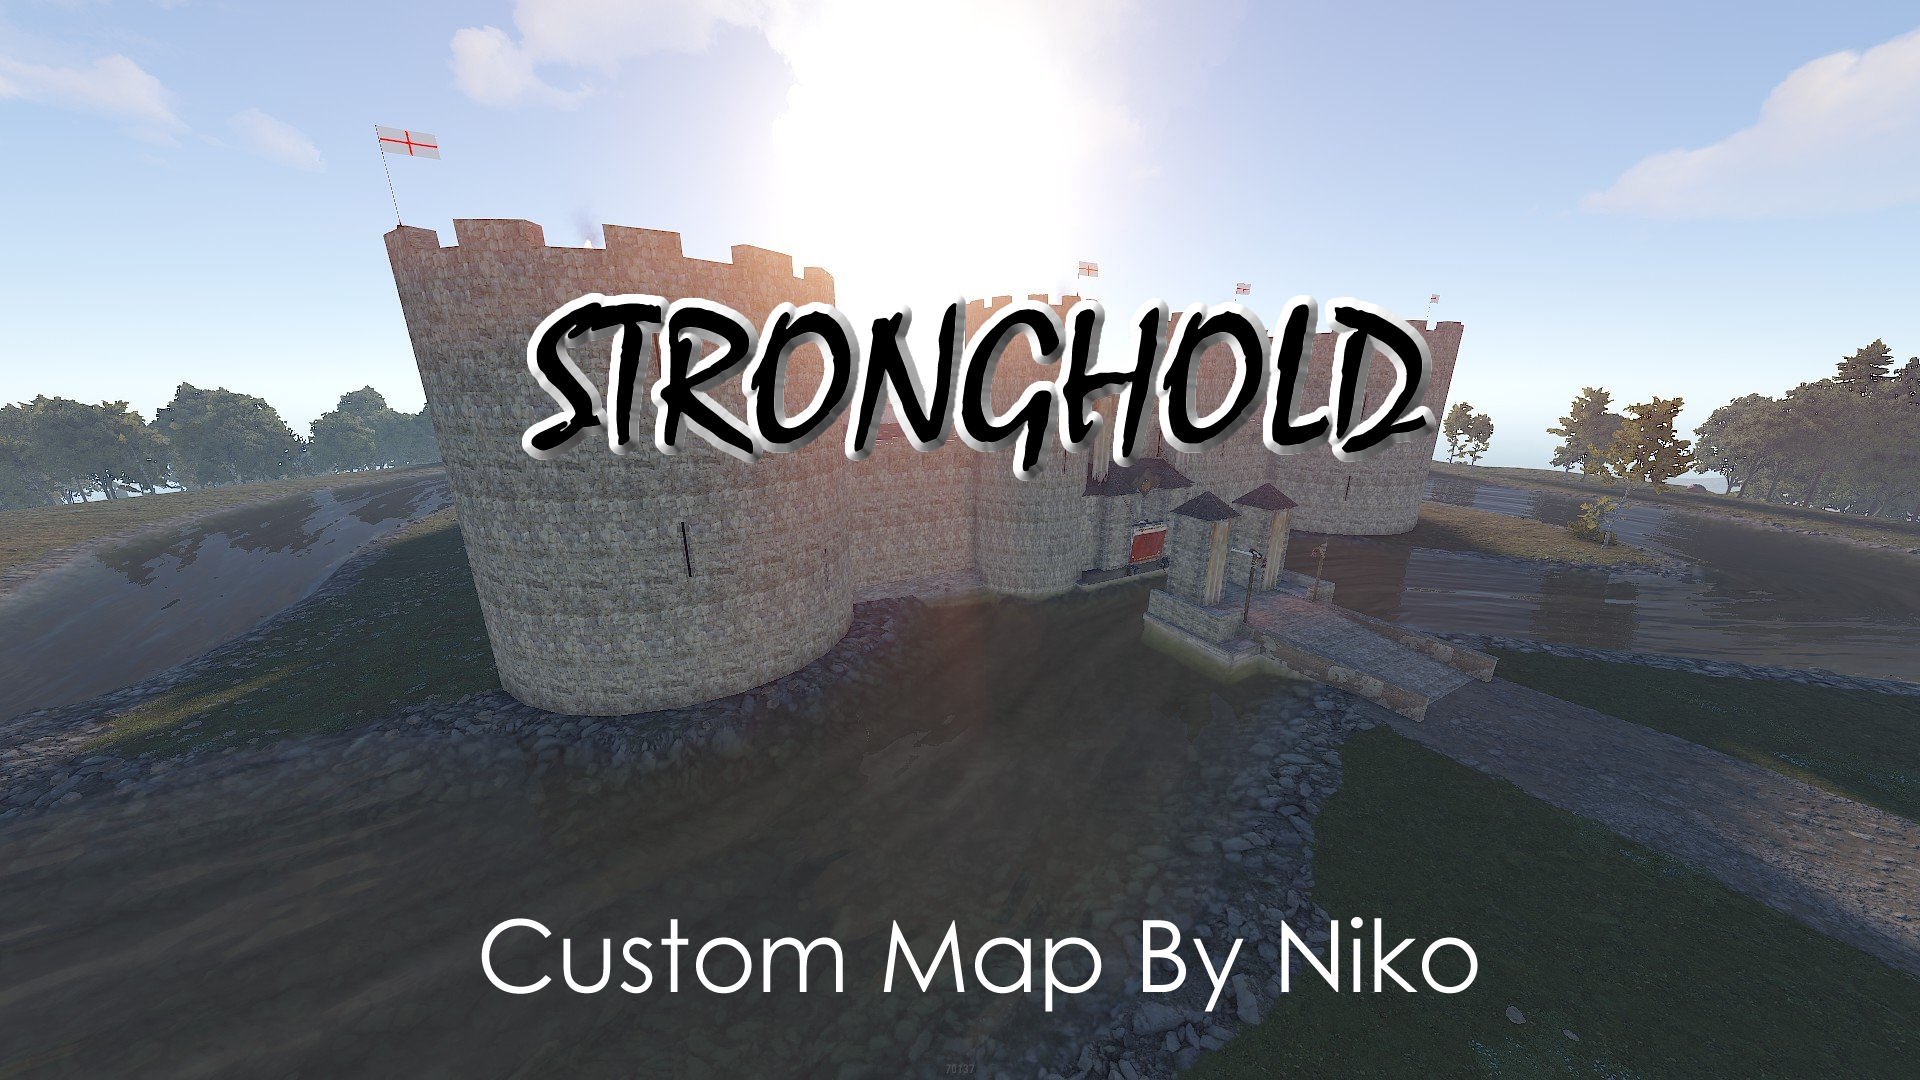 Stronghold Custom Map by Niko